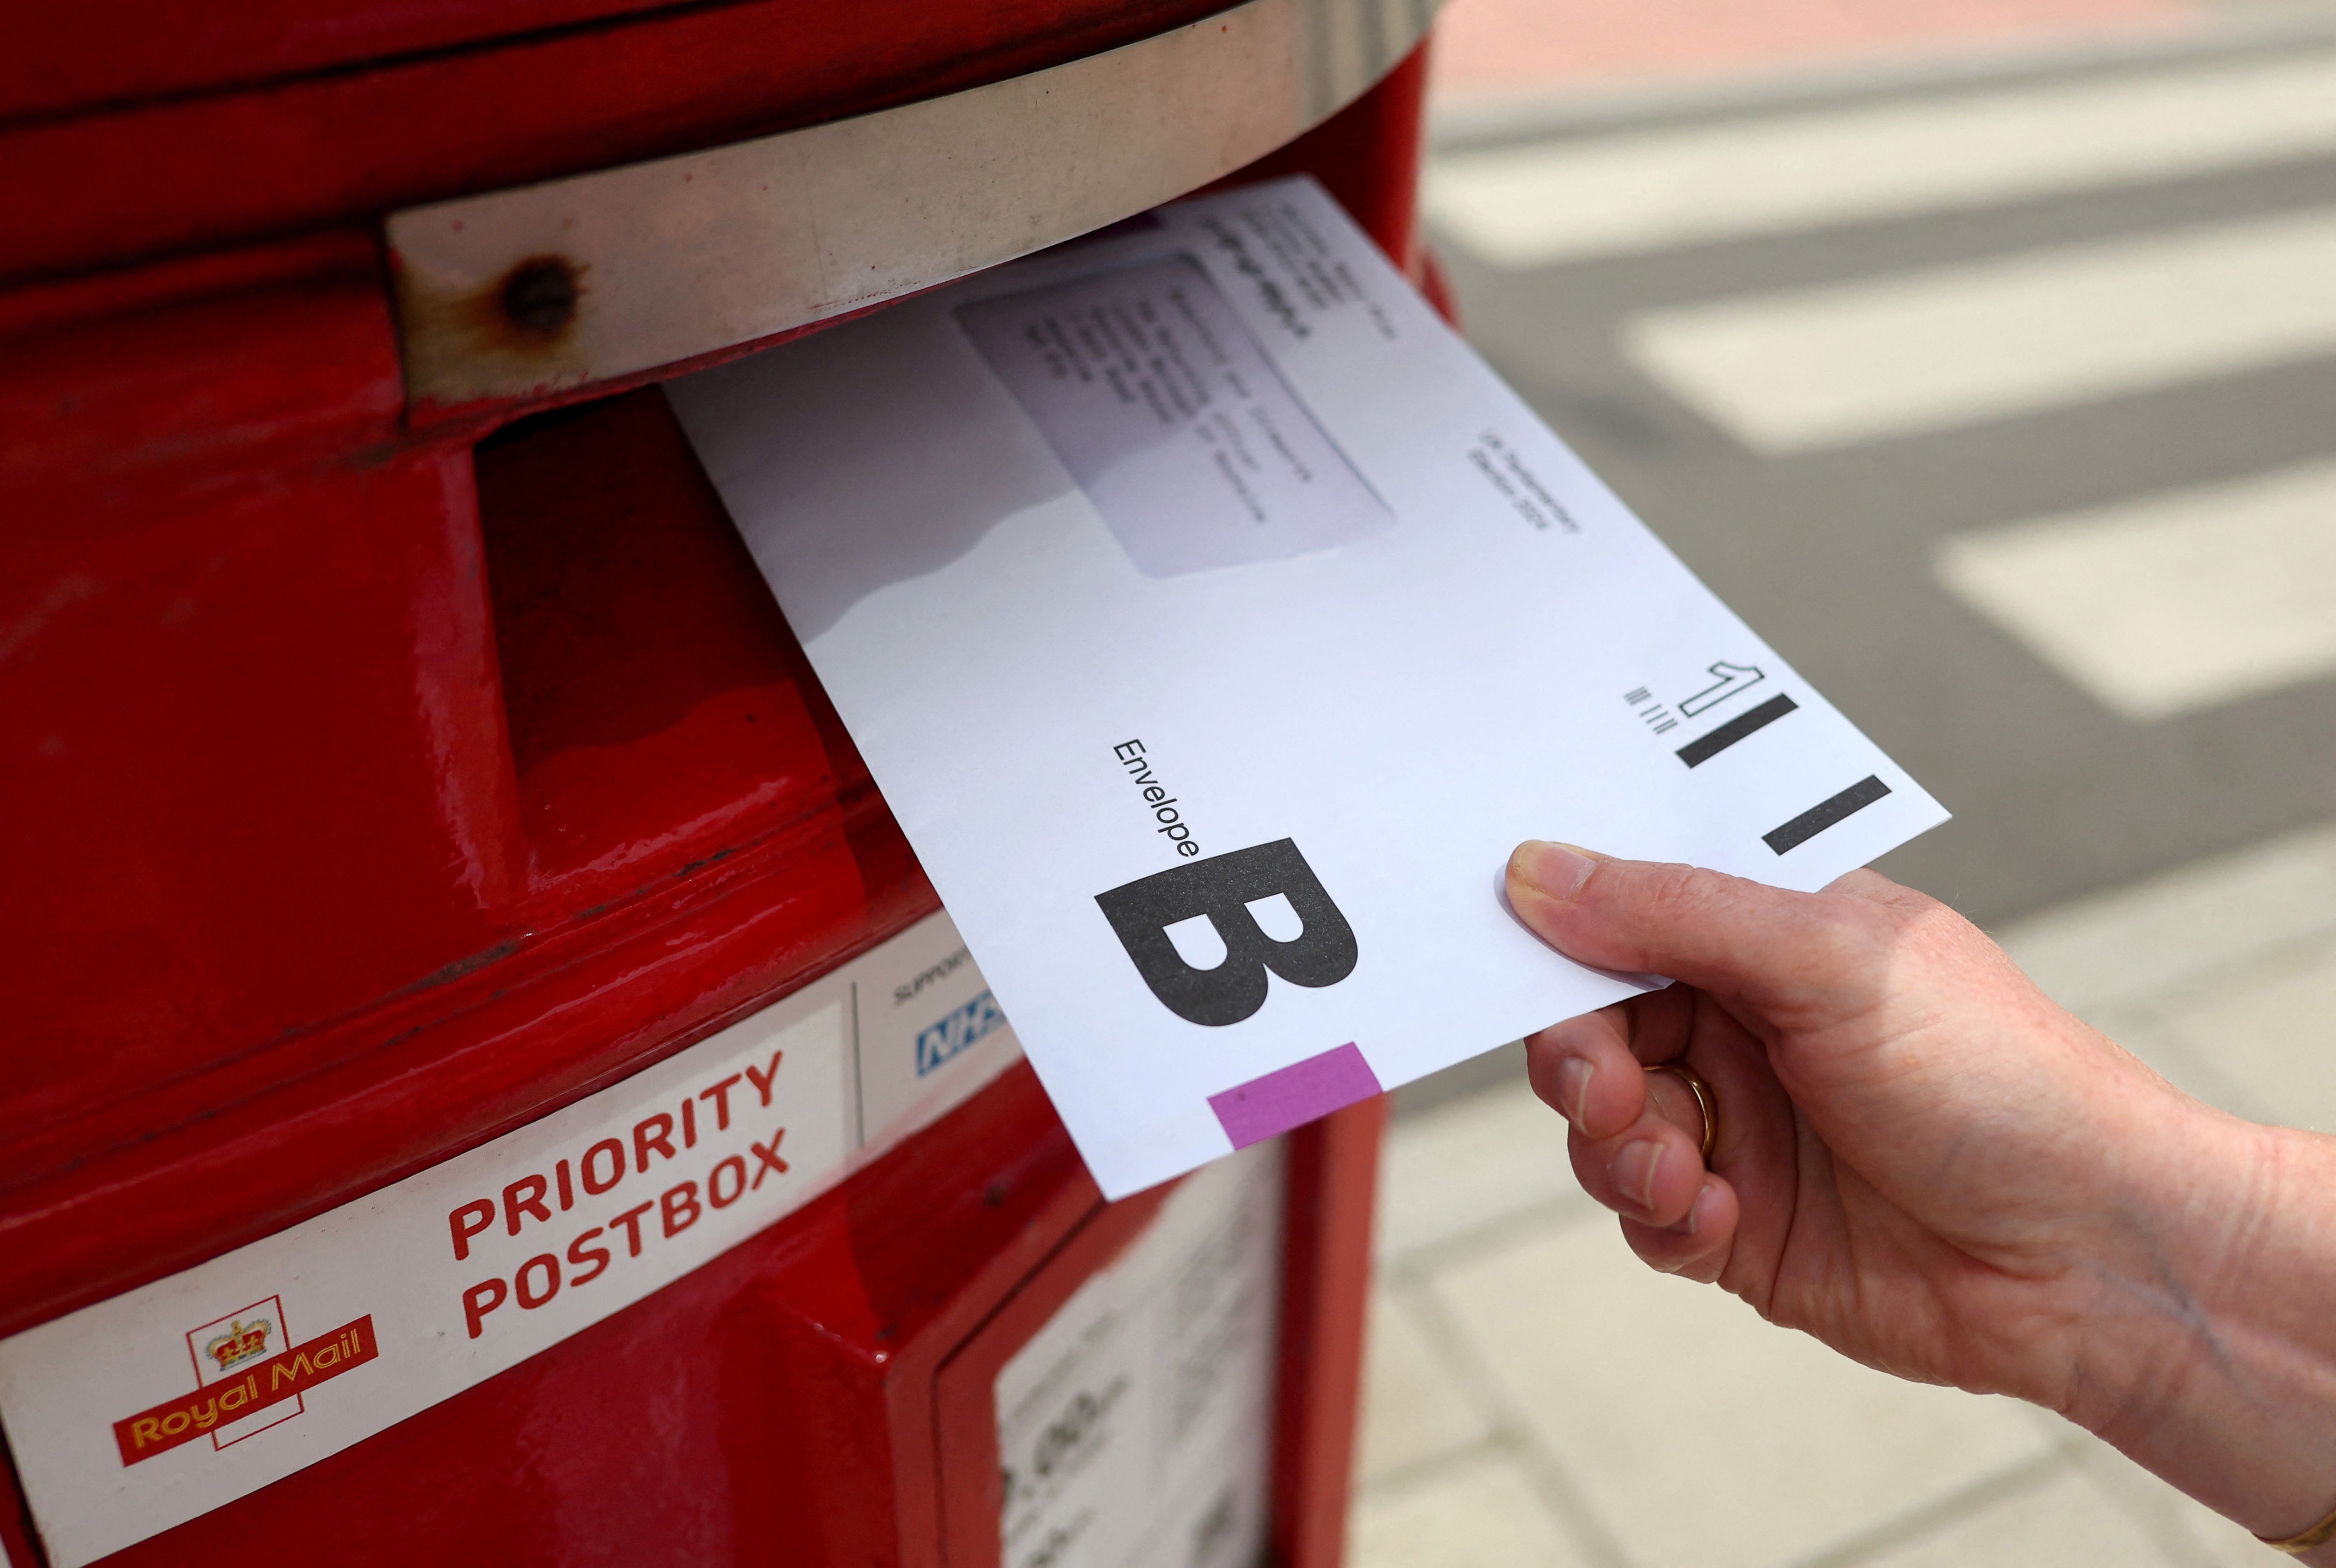 Voters have complained about delays receiving postal ballots